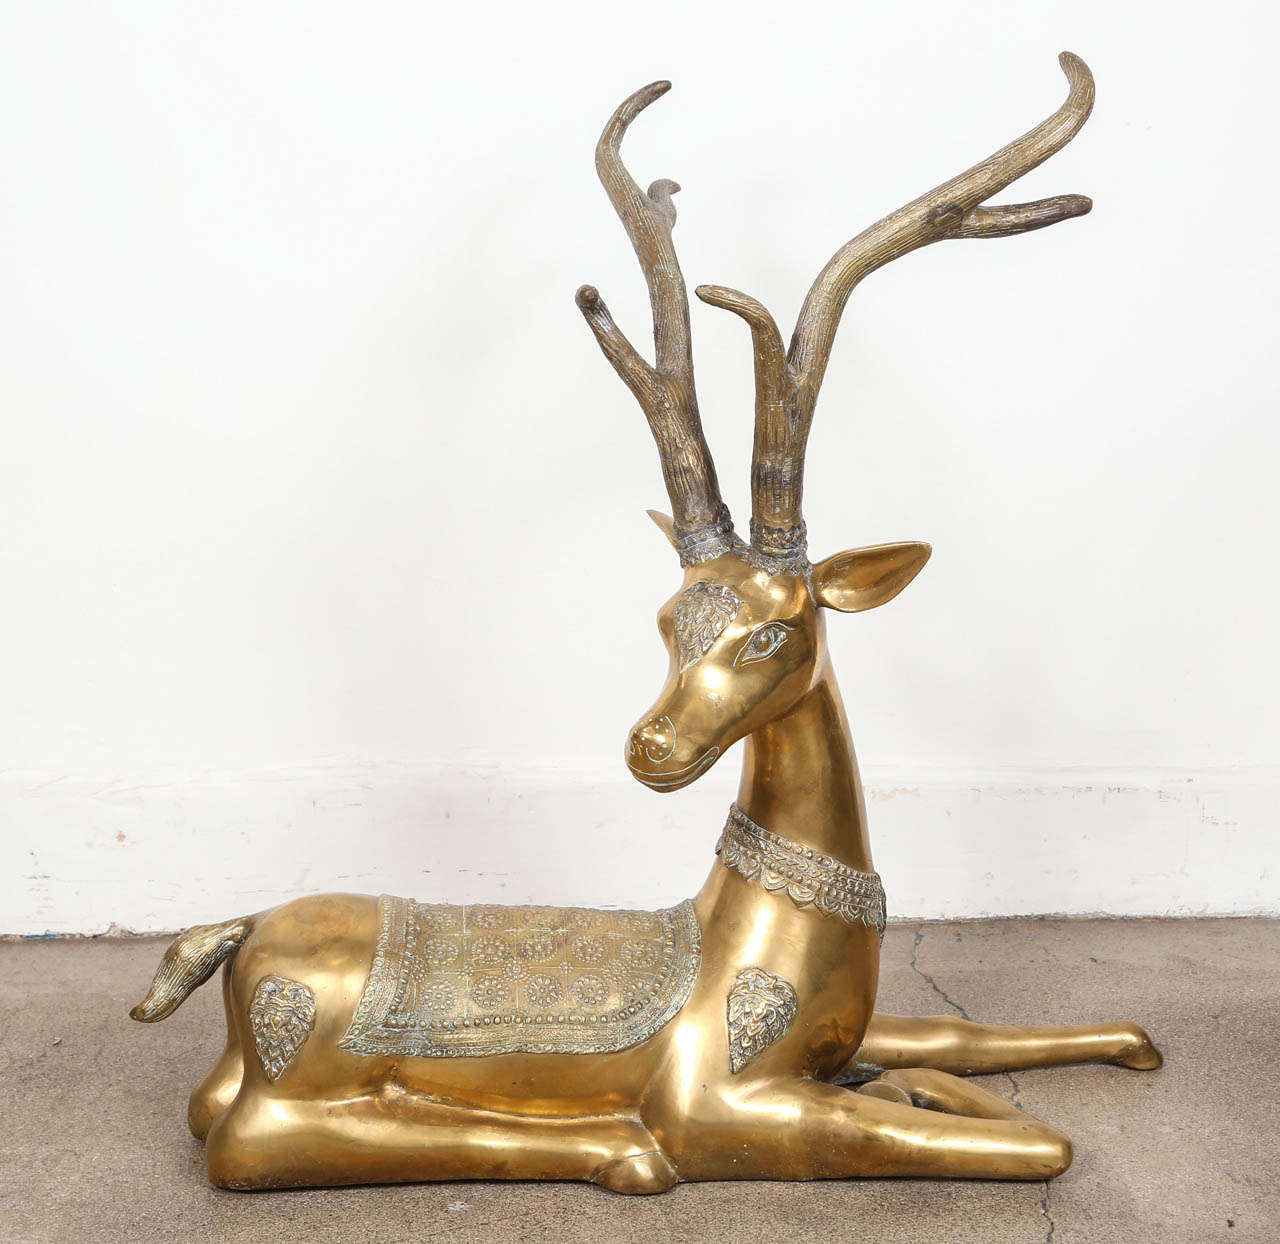 Fabulous addition to any decor, brass handcrafted North African gazelle antelope.
Floor sculpture, overall size is H: 30